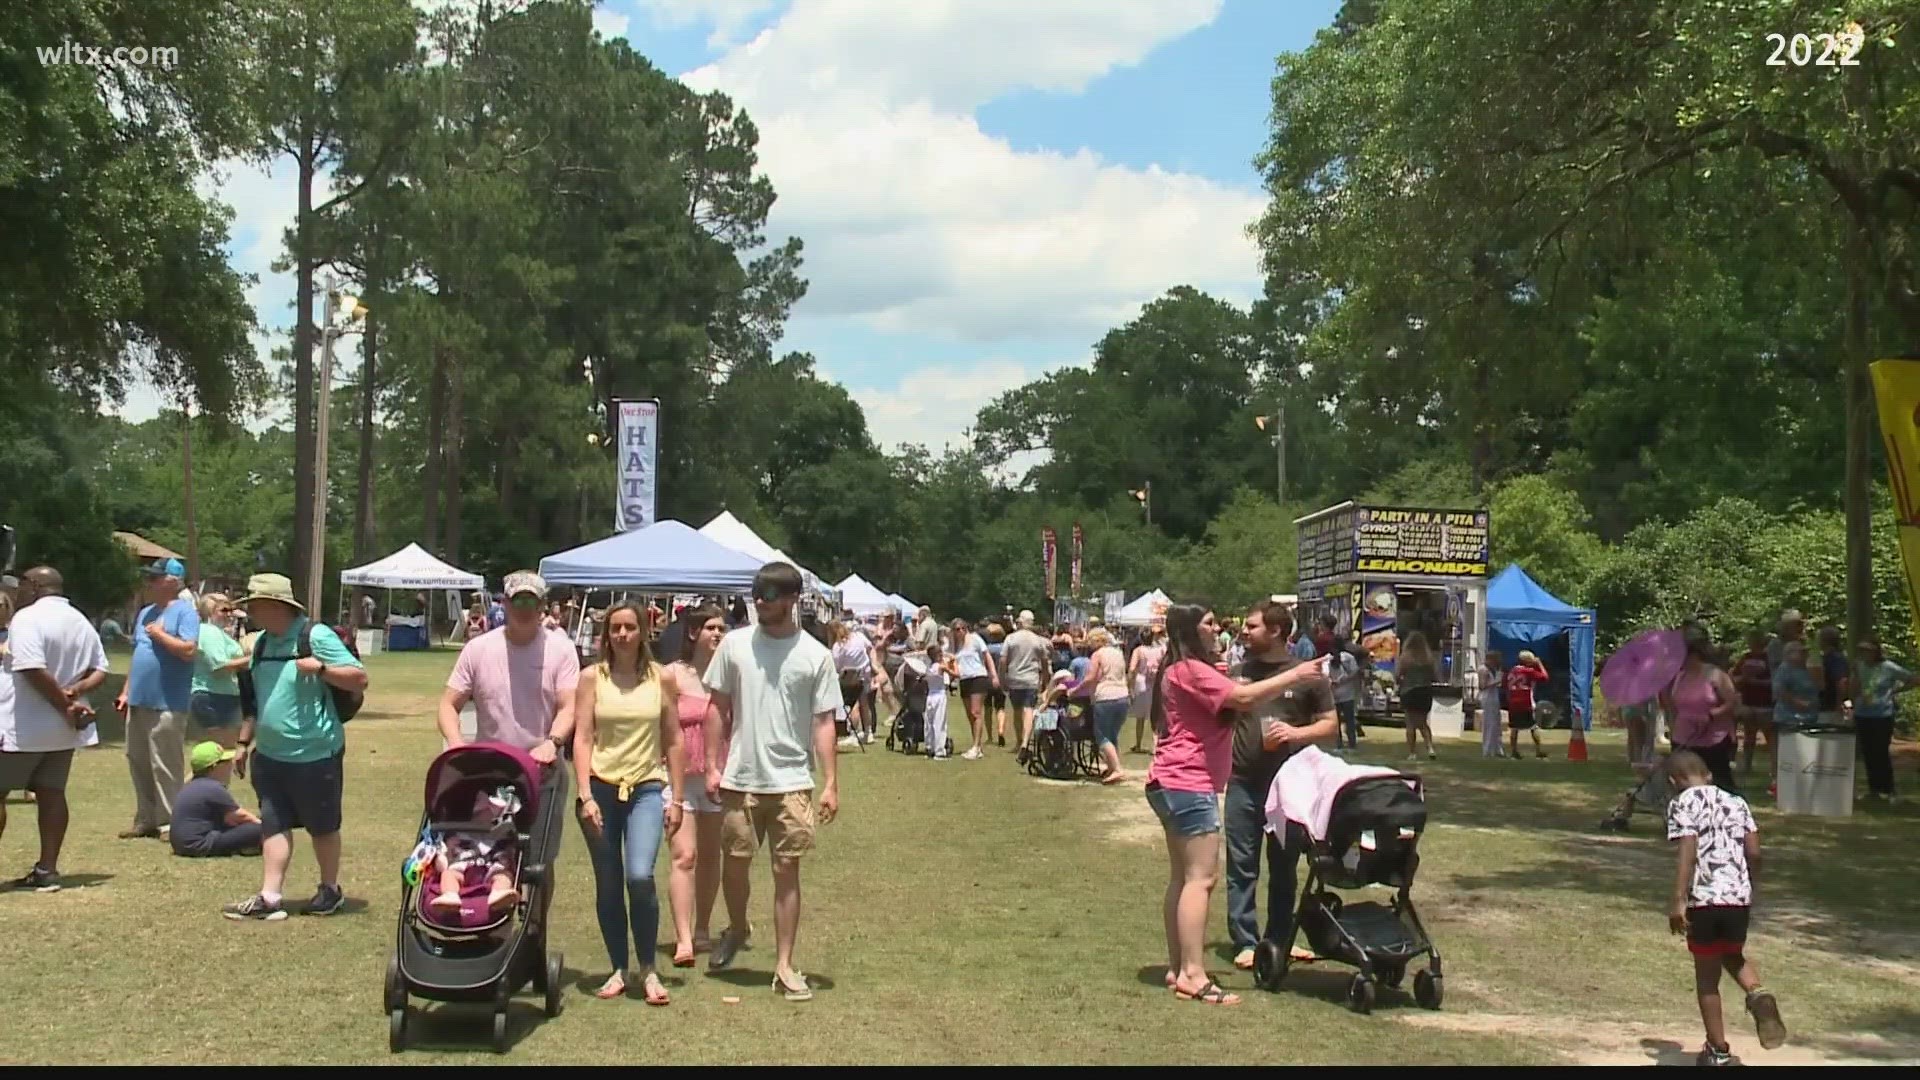 The festival is one of the oldest in the state and will begin on Thursday in Sumter.